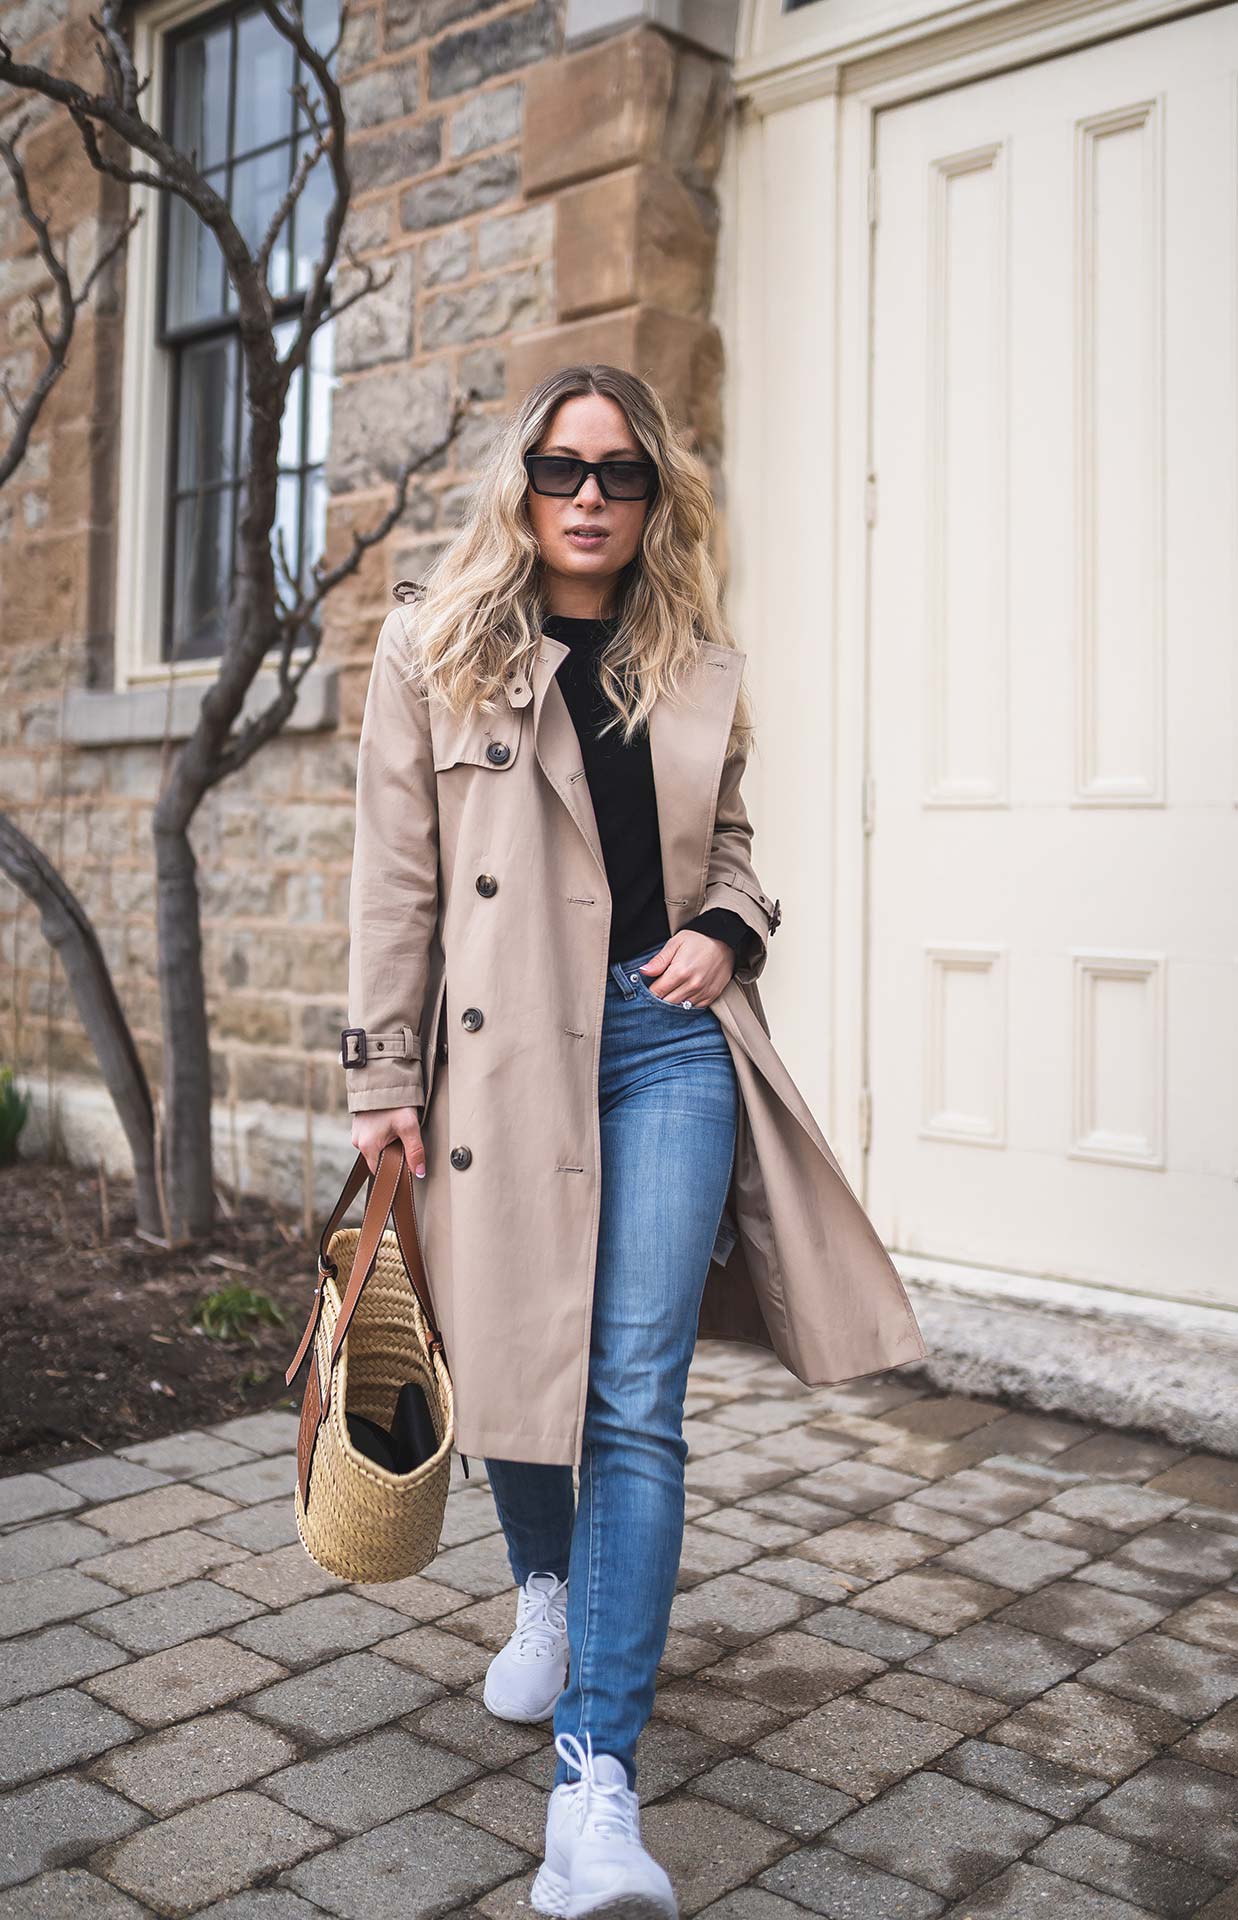 How to Look Put Together in a Trench Coat